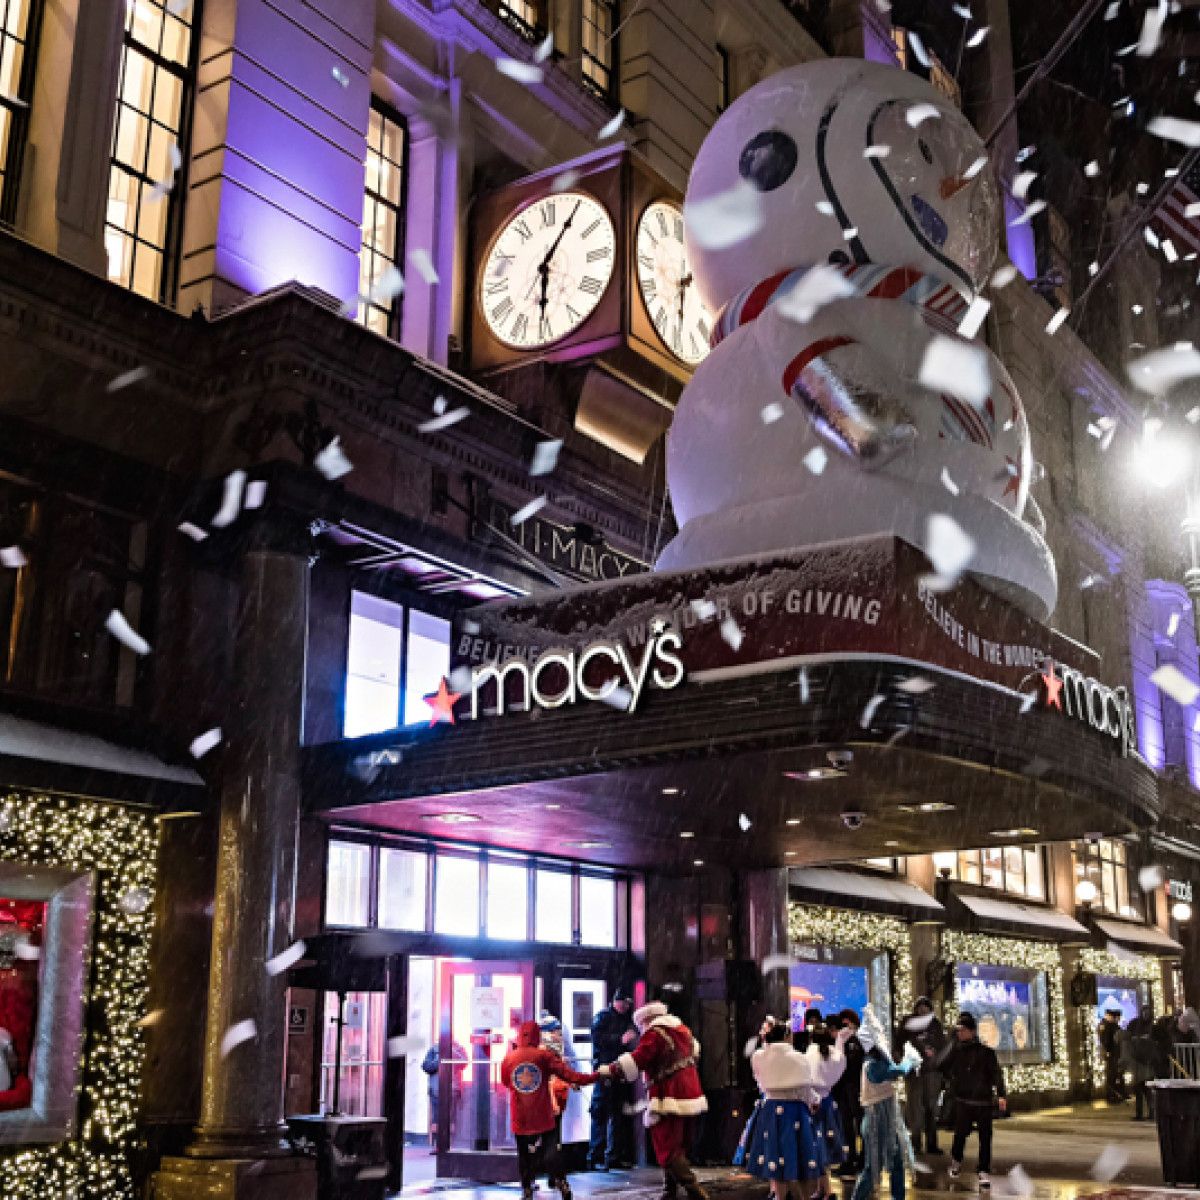 Saks Fifth Avenue Is Approaching Holiday Windows a Little